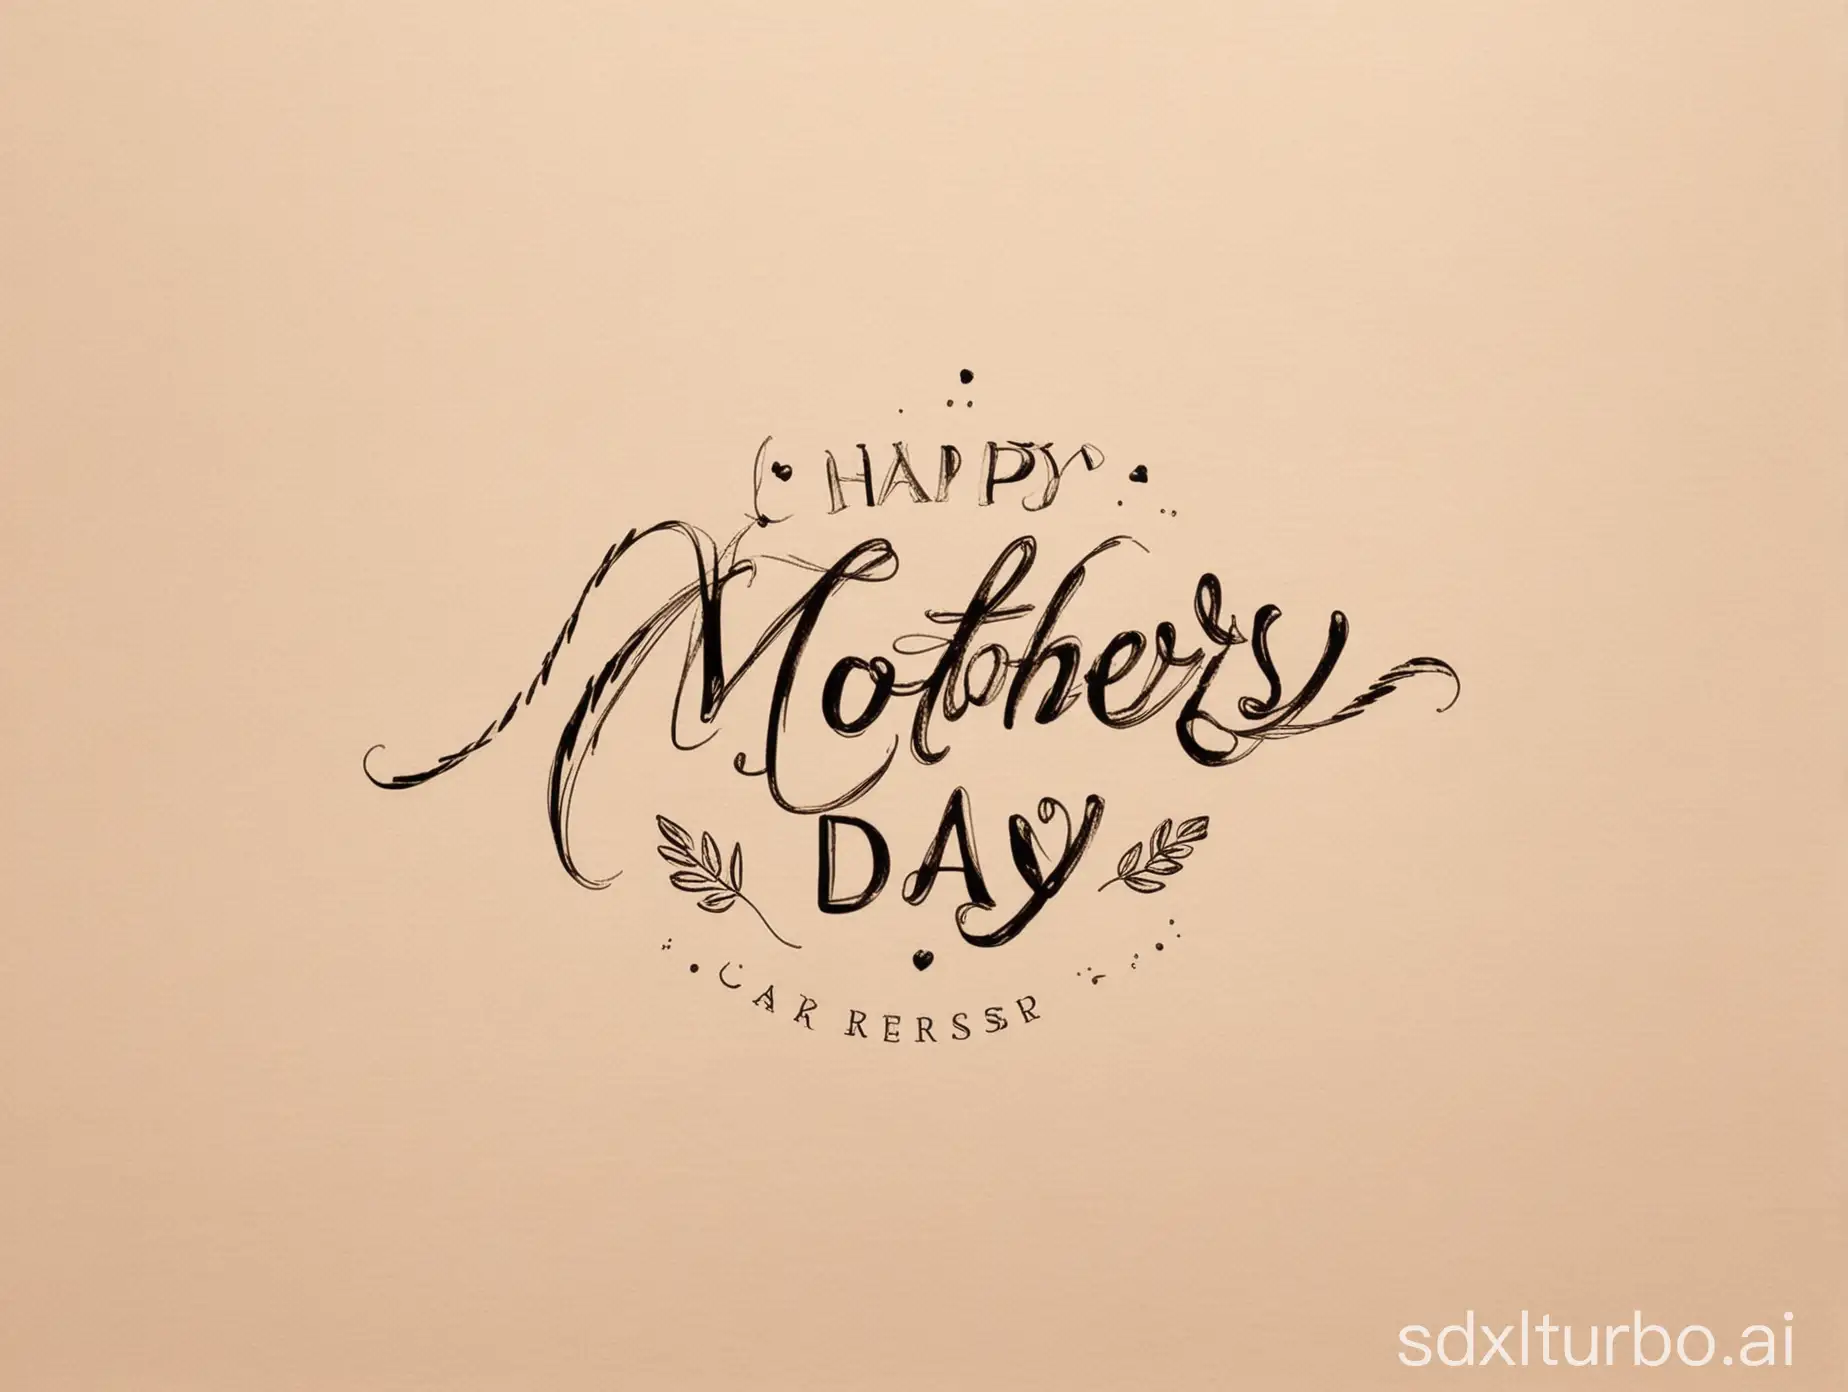 A minimalist logo design featuring the words "Happy Mother's Day" in an elegant, cursive typeface.